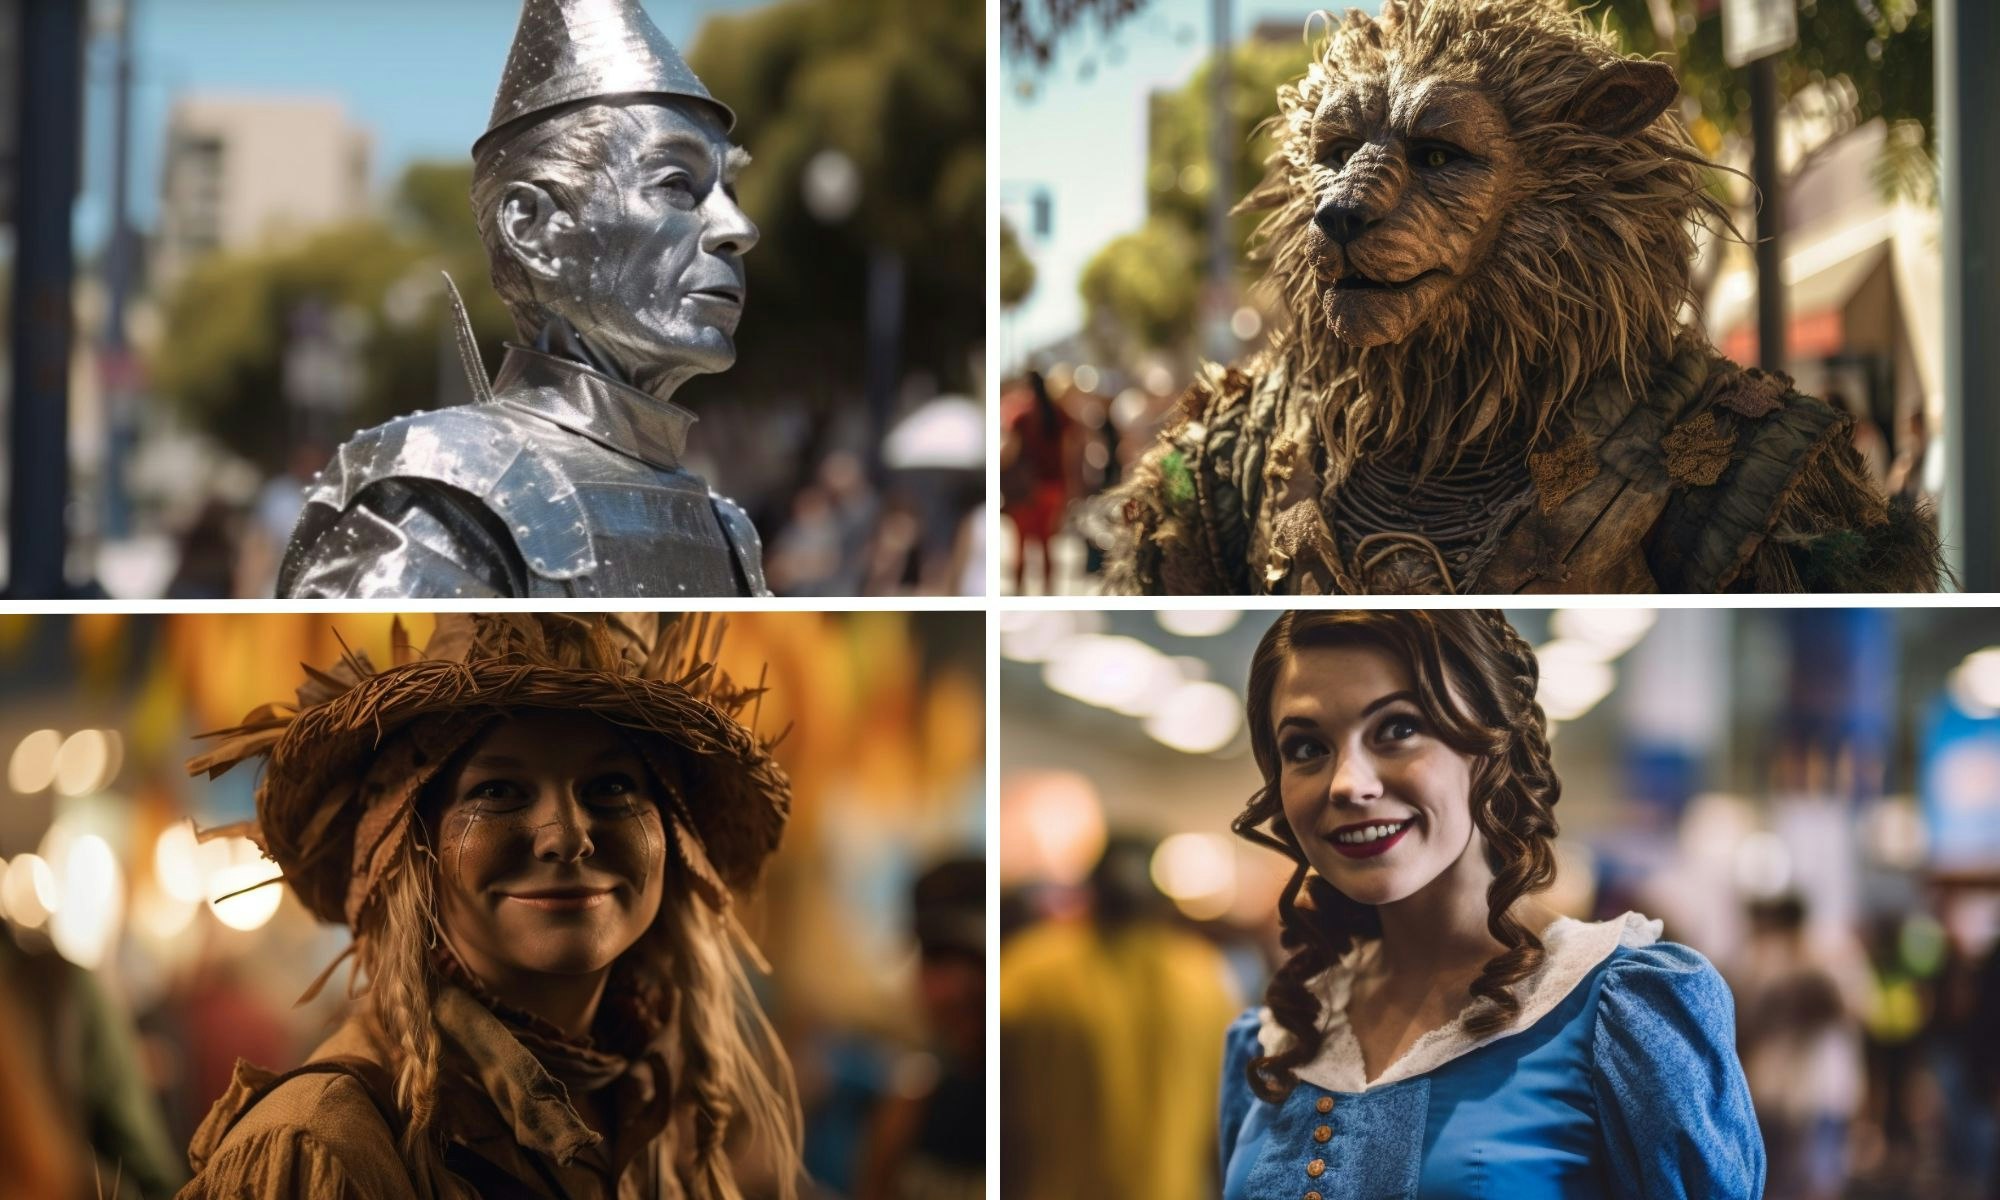 The Wizard of Oz Experience in Hervey Bay